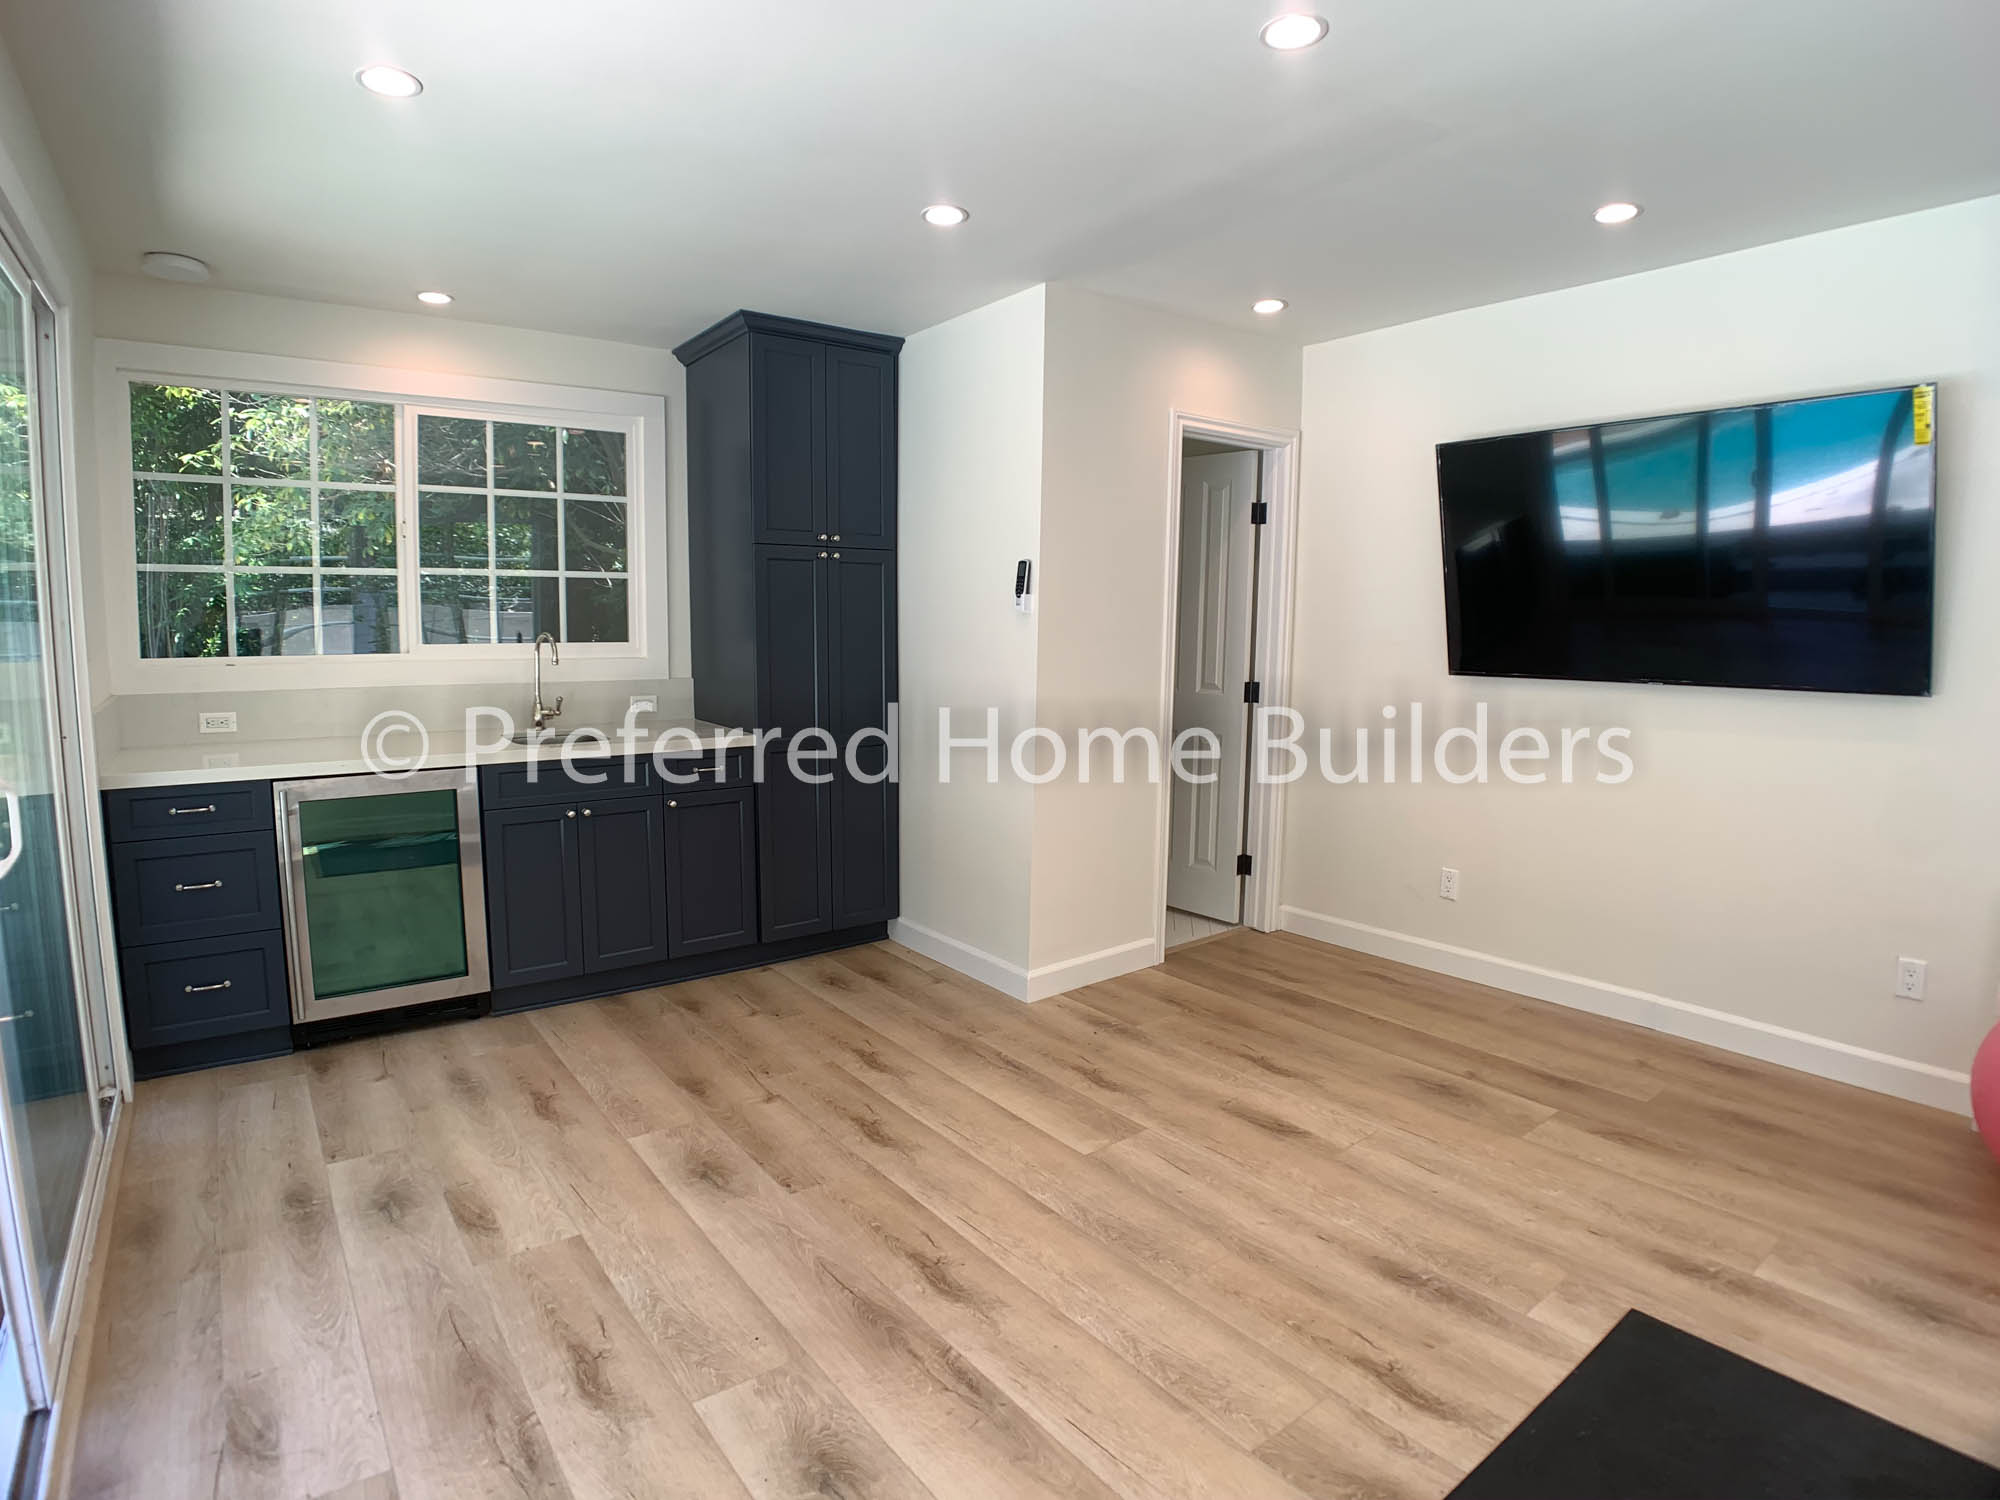 General Remodel in Brentwood Heights 120